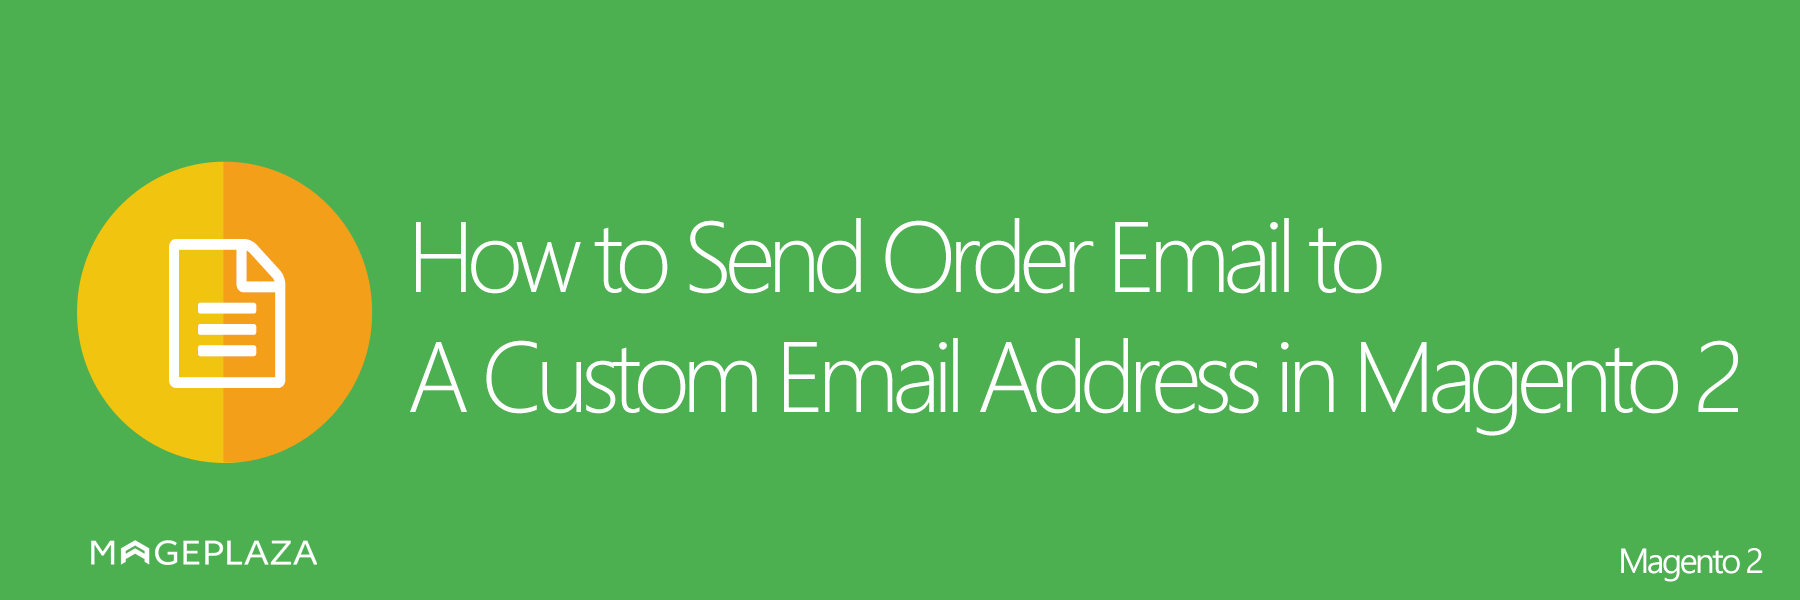 Send Order Email to A Custom Email Address